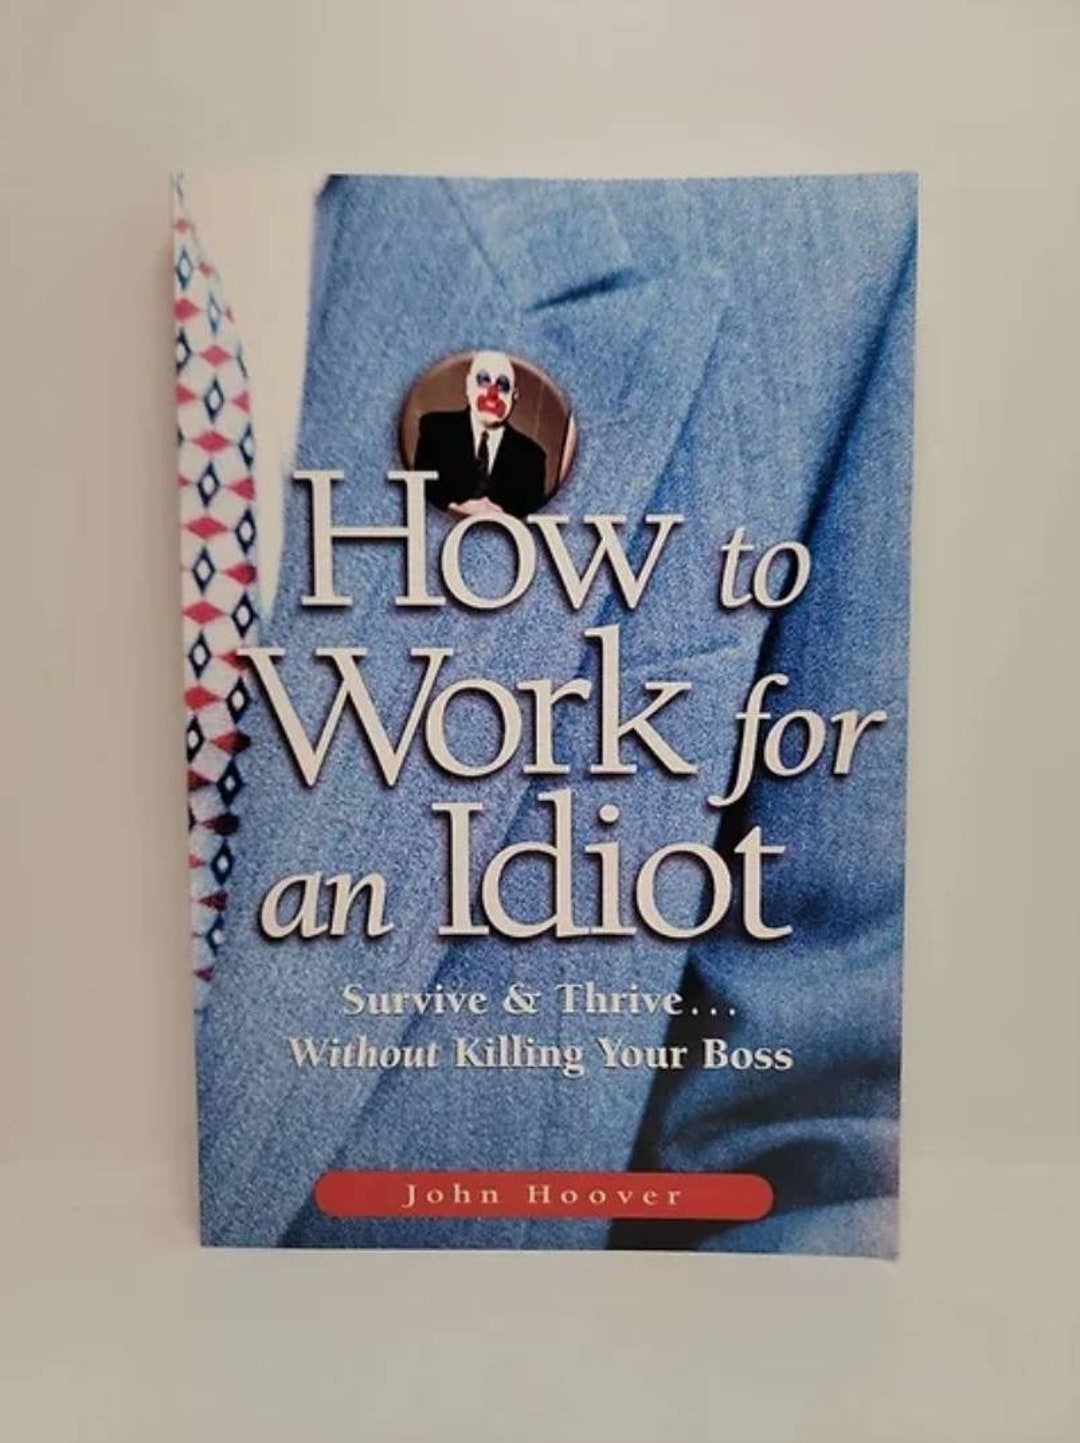 to Work for an Idiot: Survive Thrive Without Killing - Etsy